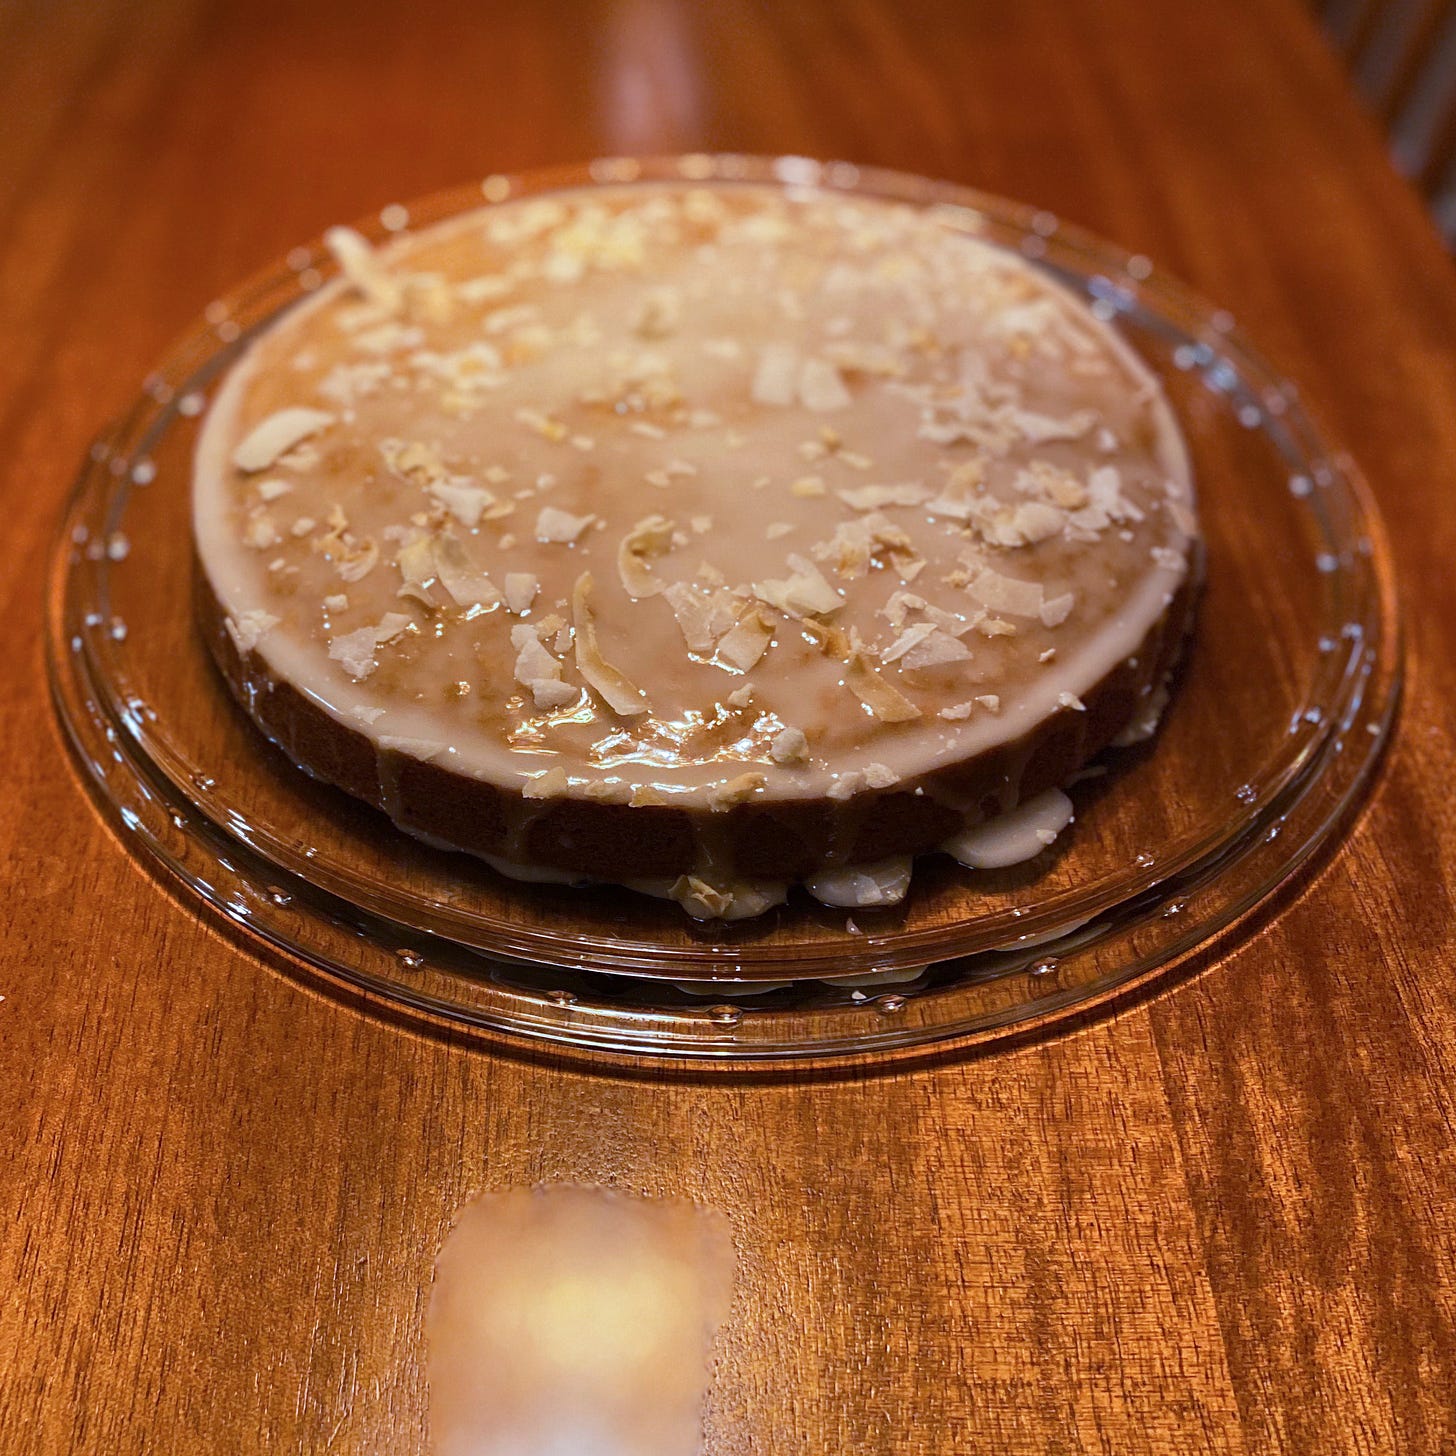 A golden cake in a white glaze that has dripped over the edges, onto a glass cake plate. Large flakes of coconut are sprinkled over the top.